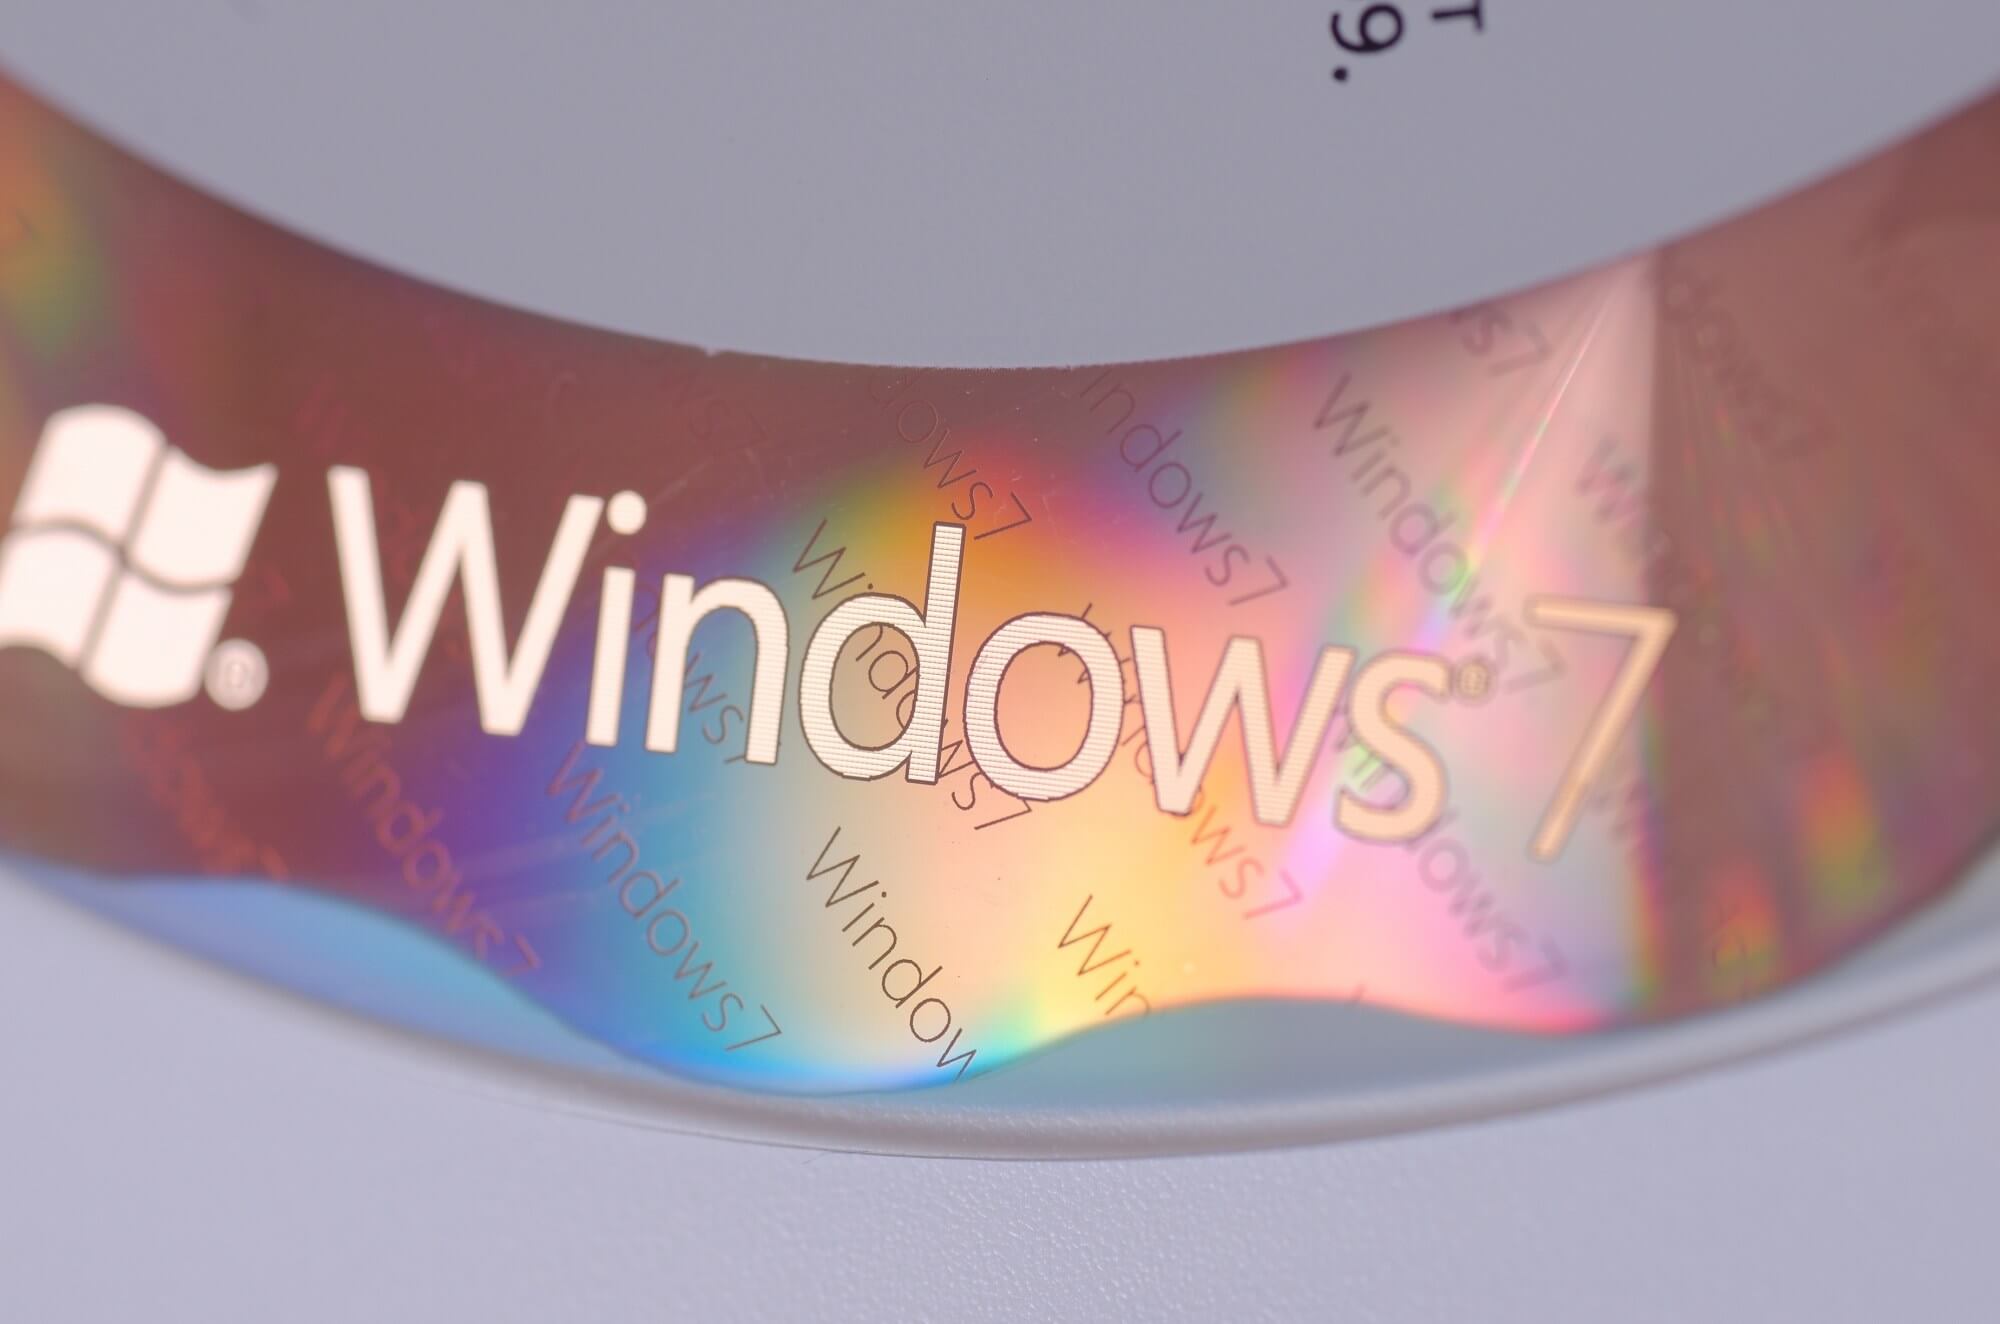 People won't abandon Windows 7, OS still found on almost a quarter of all devices